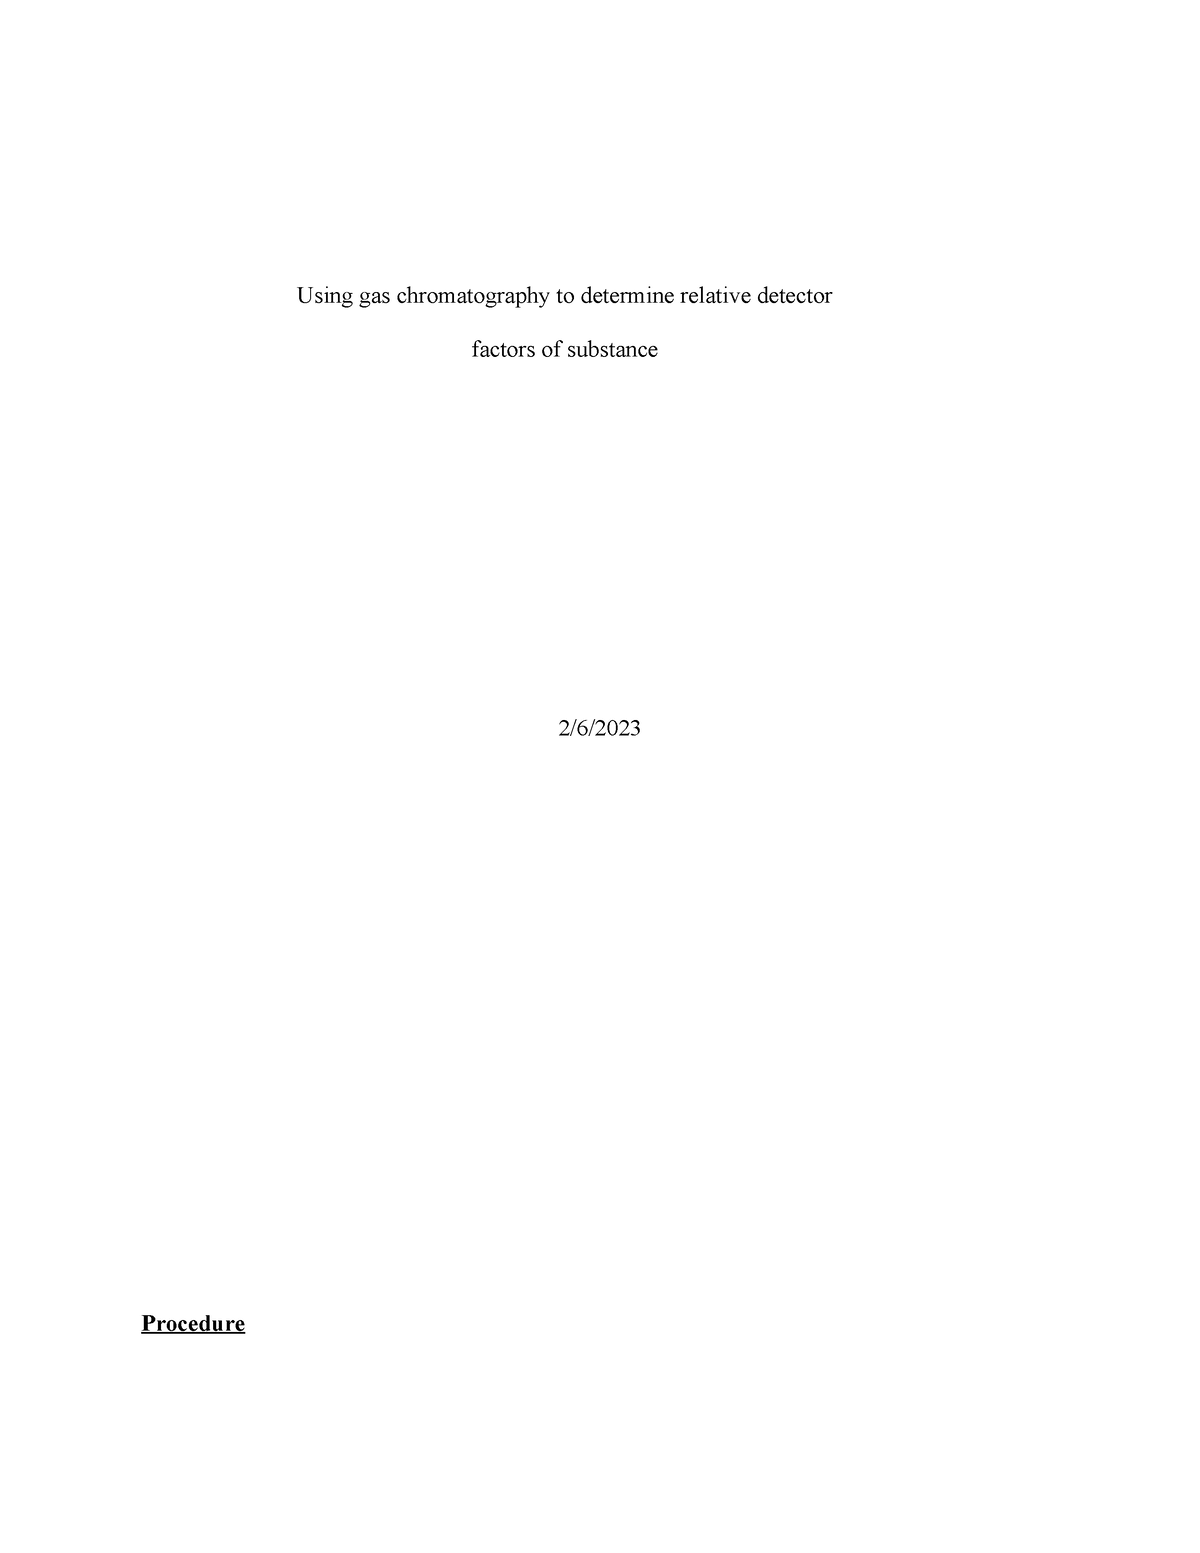 Gas chromatography report - Using gas chromatography to determine ...